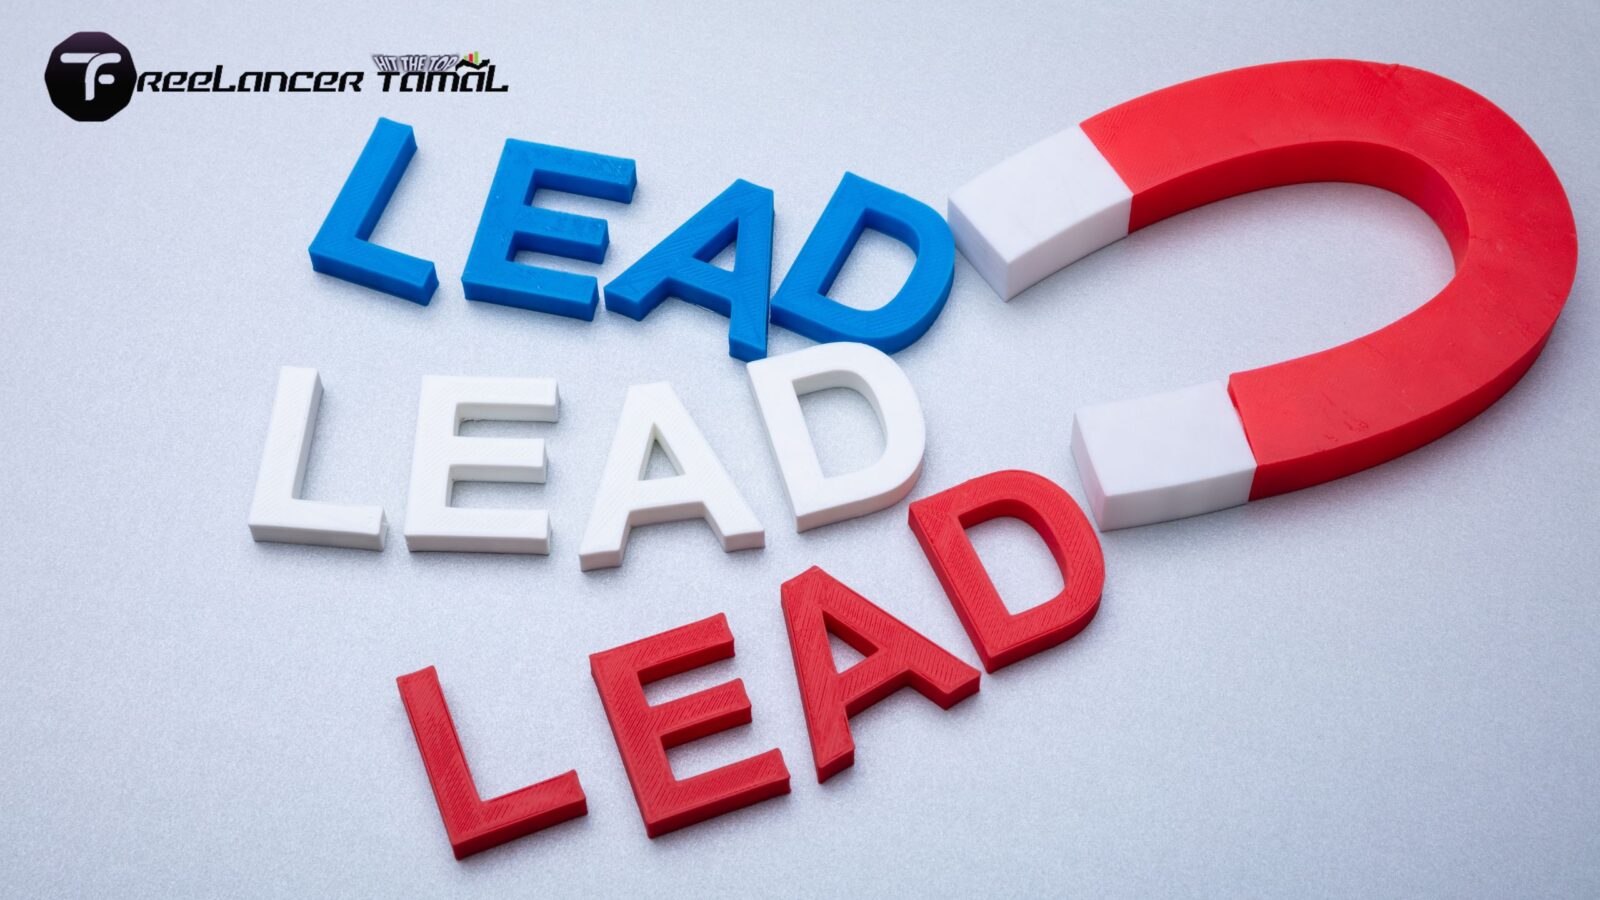 Unleash Your Potential: Power Up Your Lead Generation with These Tools